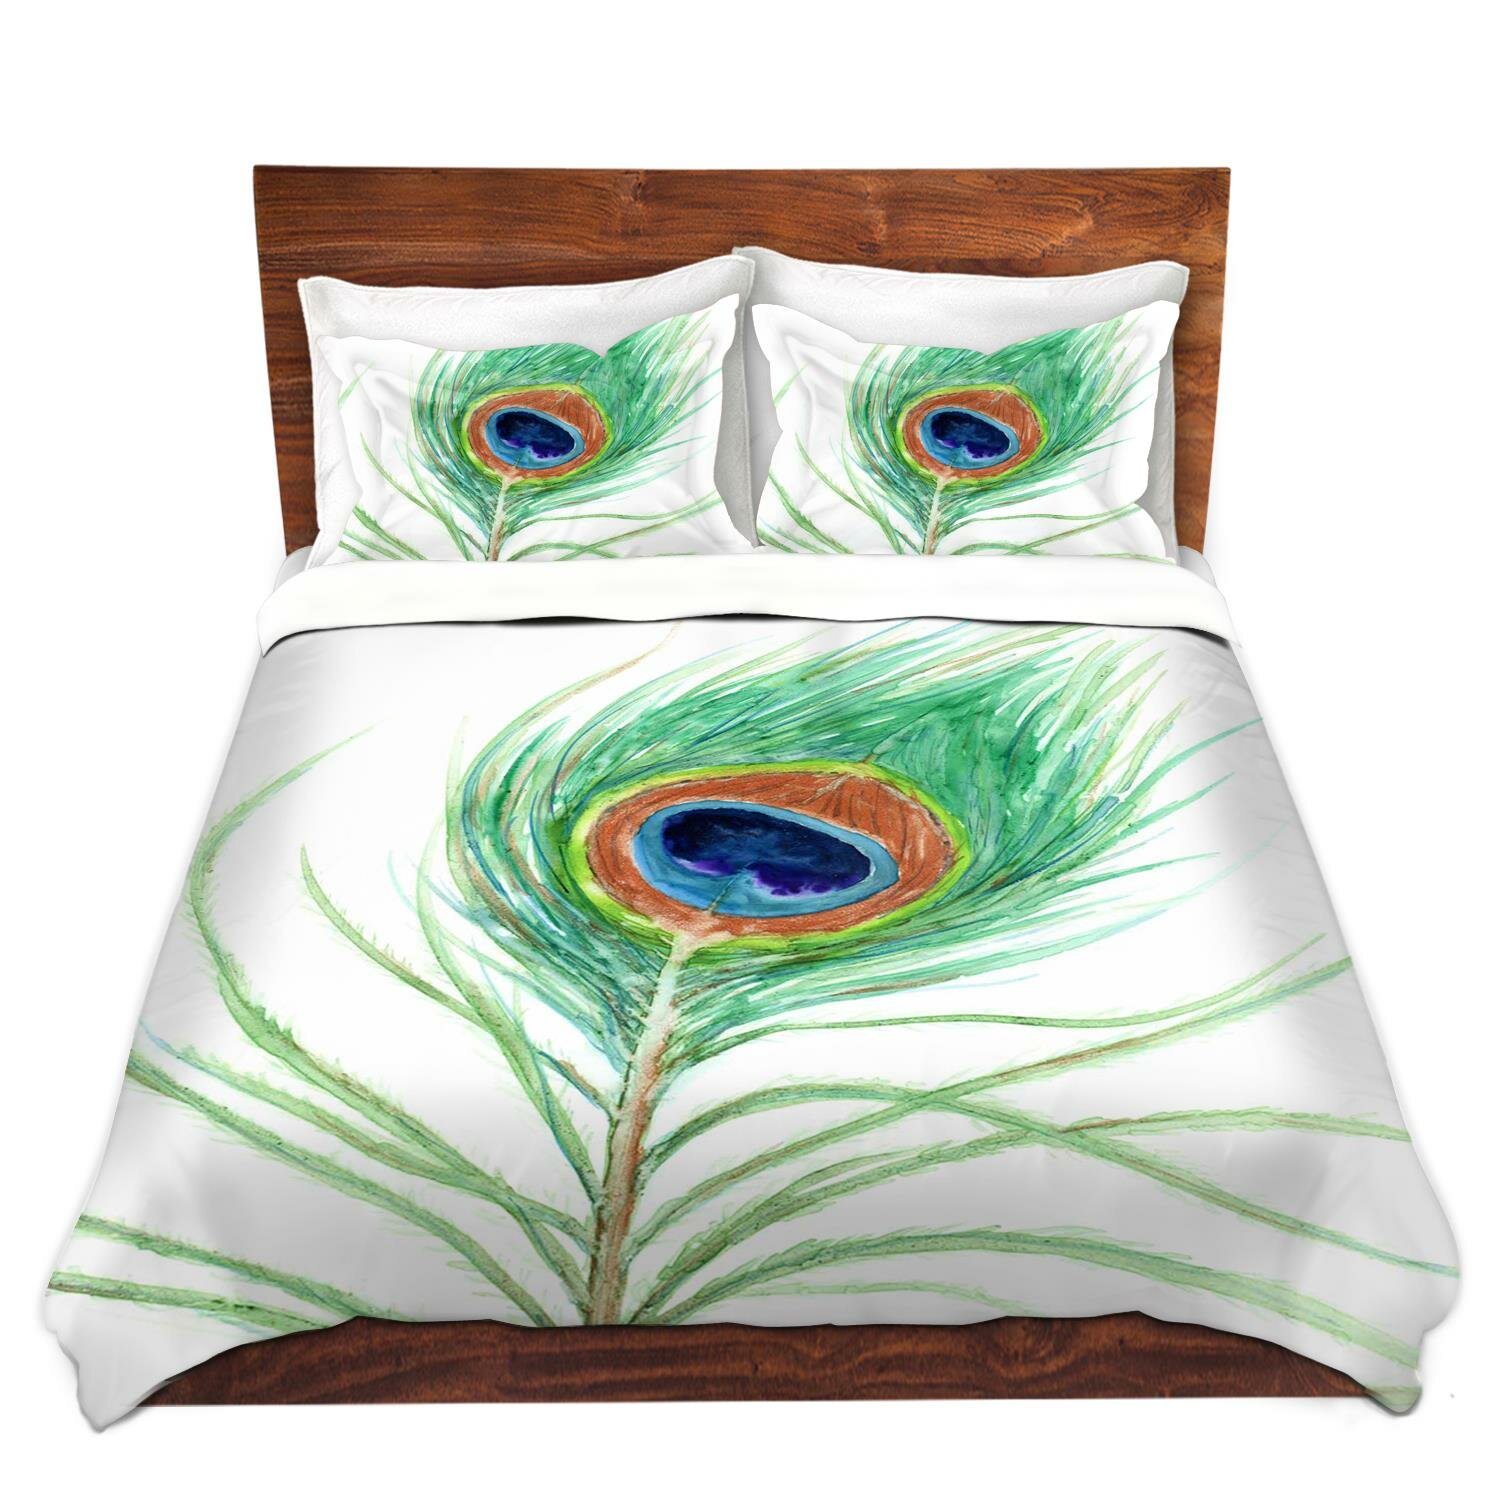 Dianochedesigns Peacock Feather Duvet Cover Set Wayfair